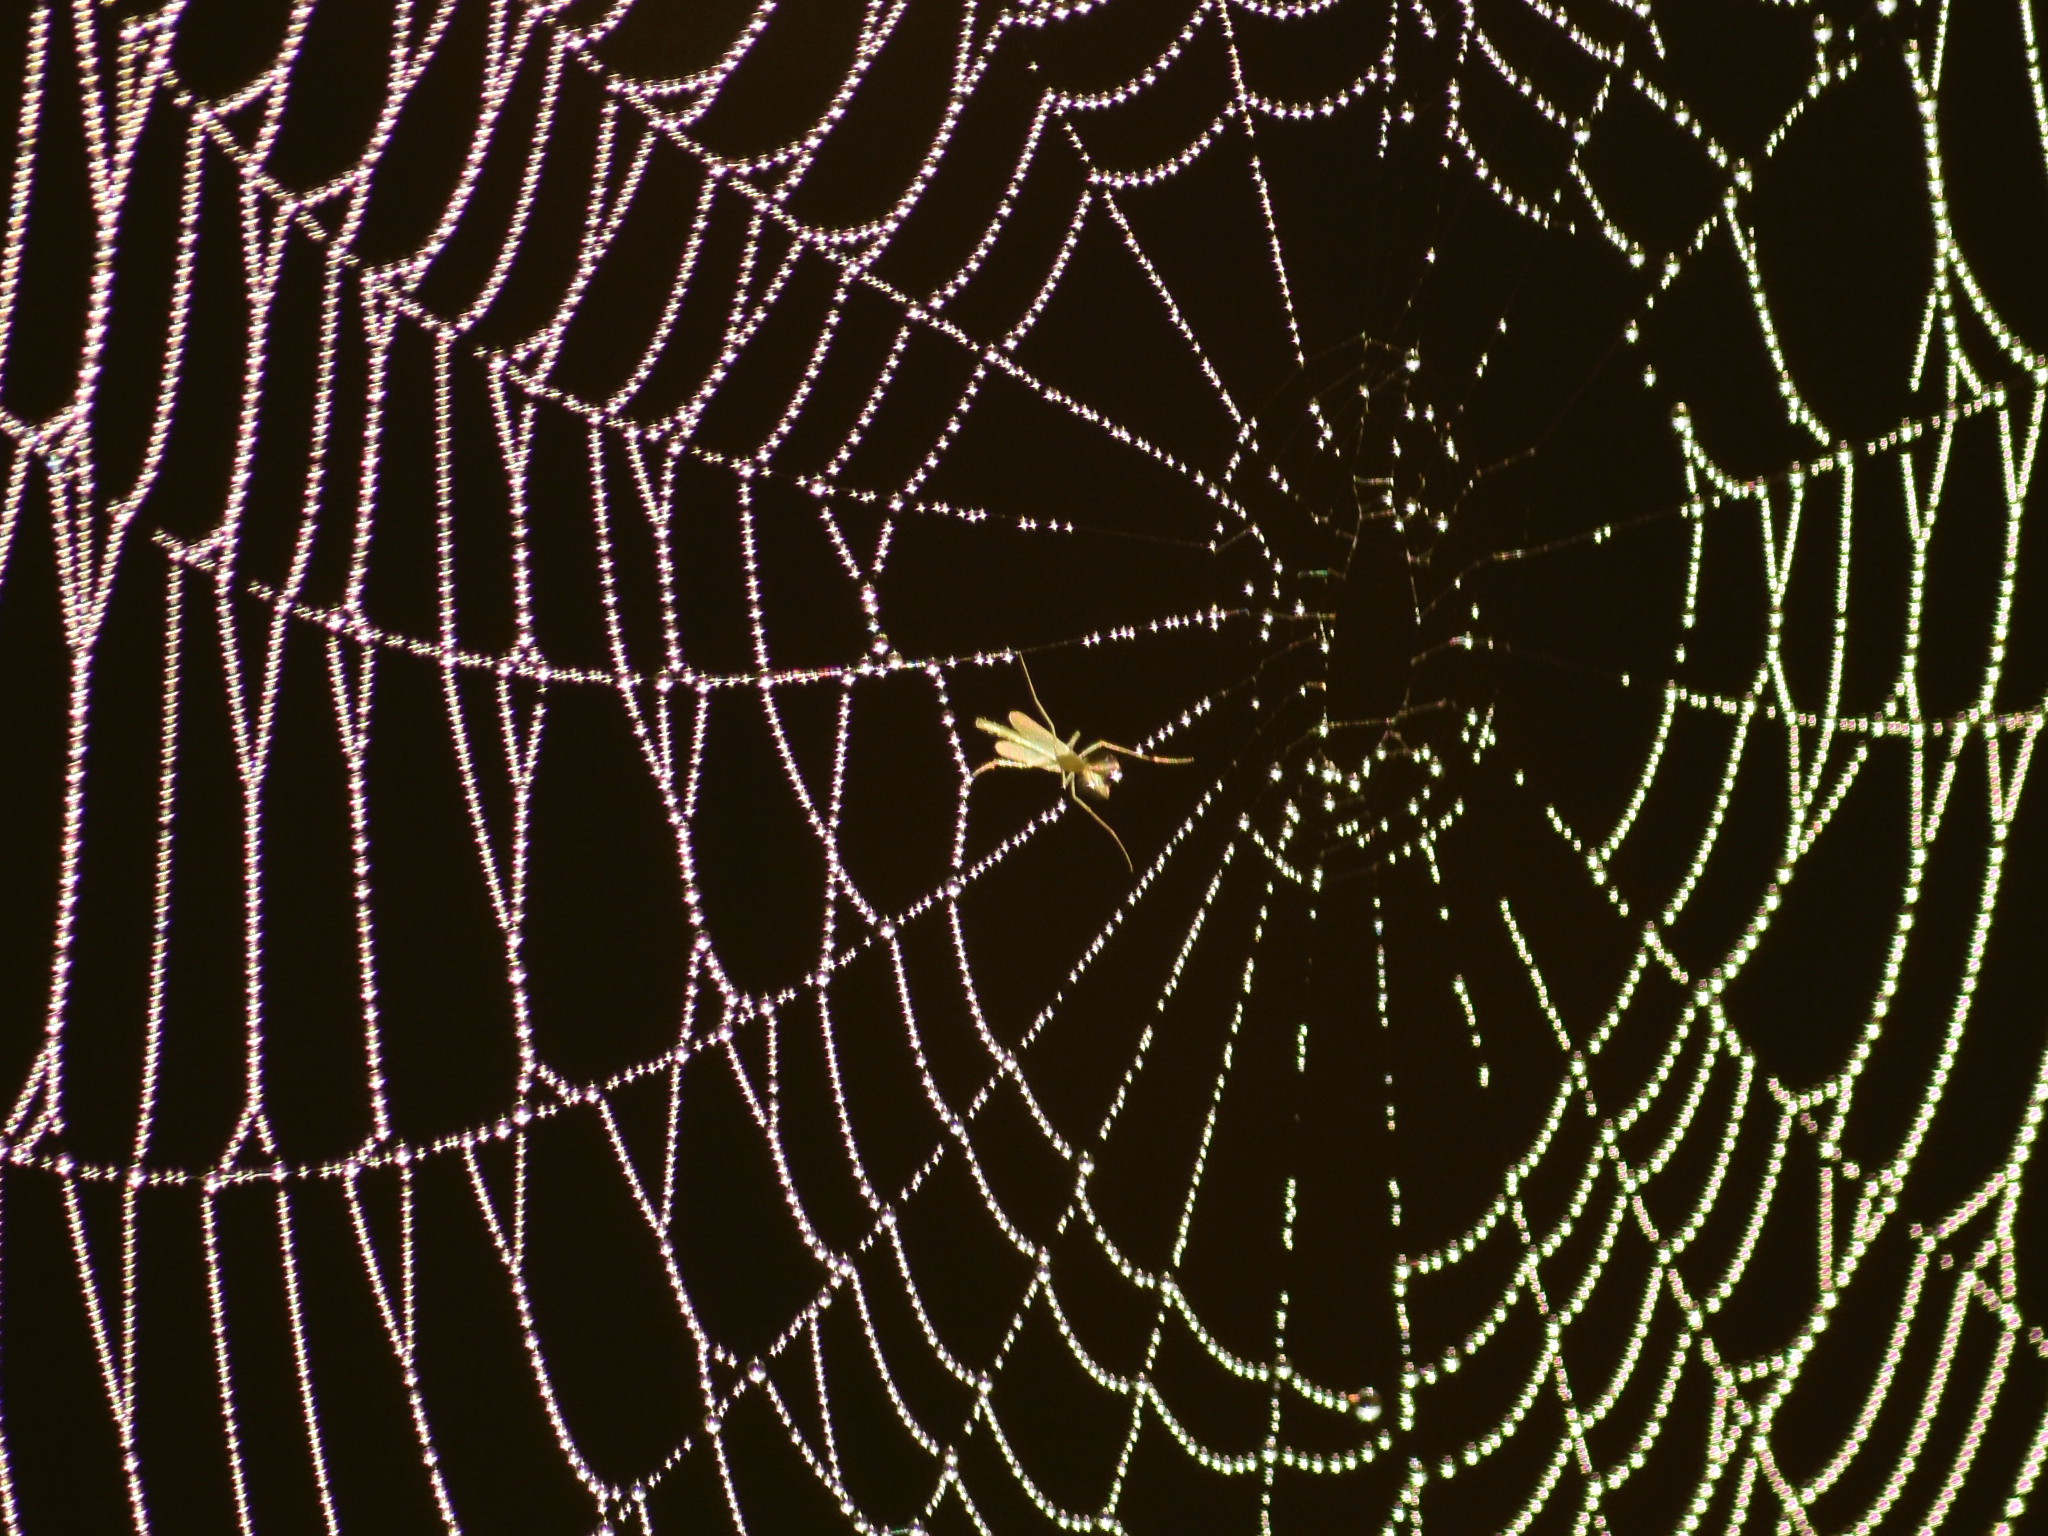 Insect in Spider Web